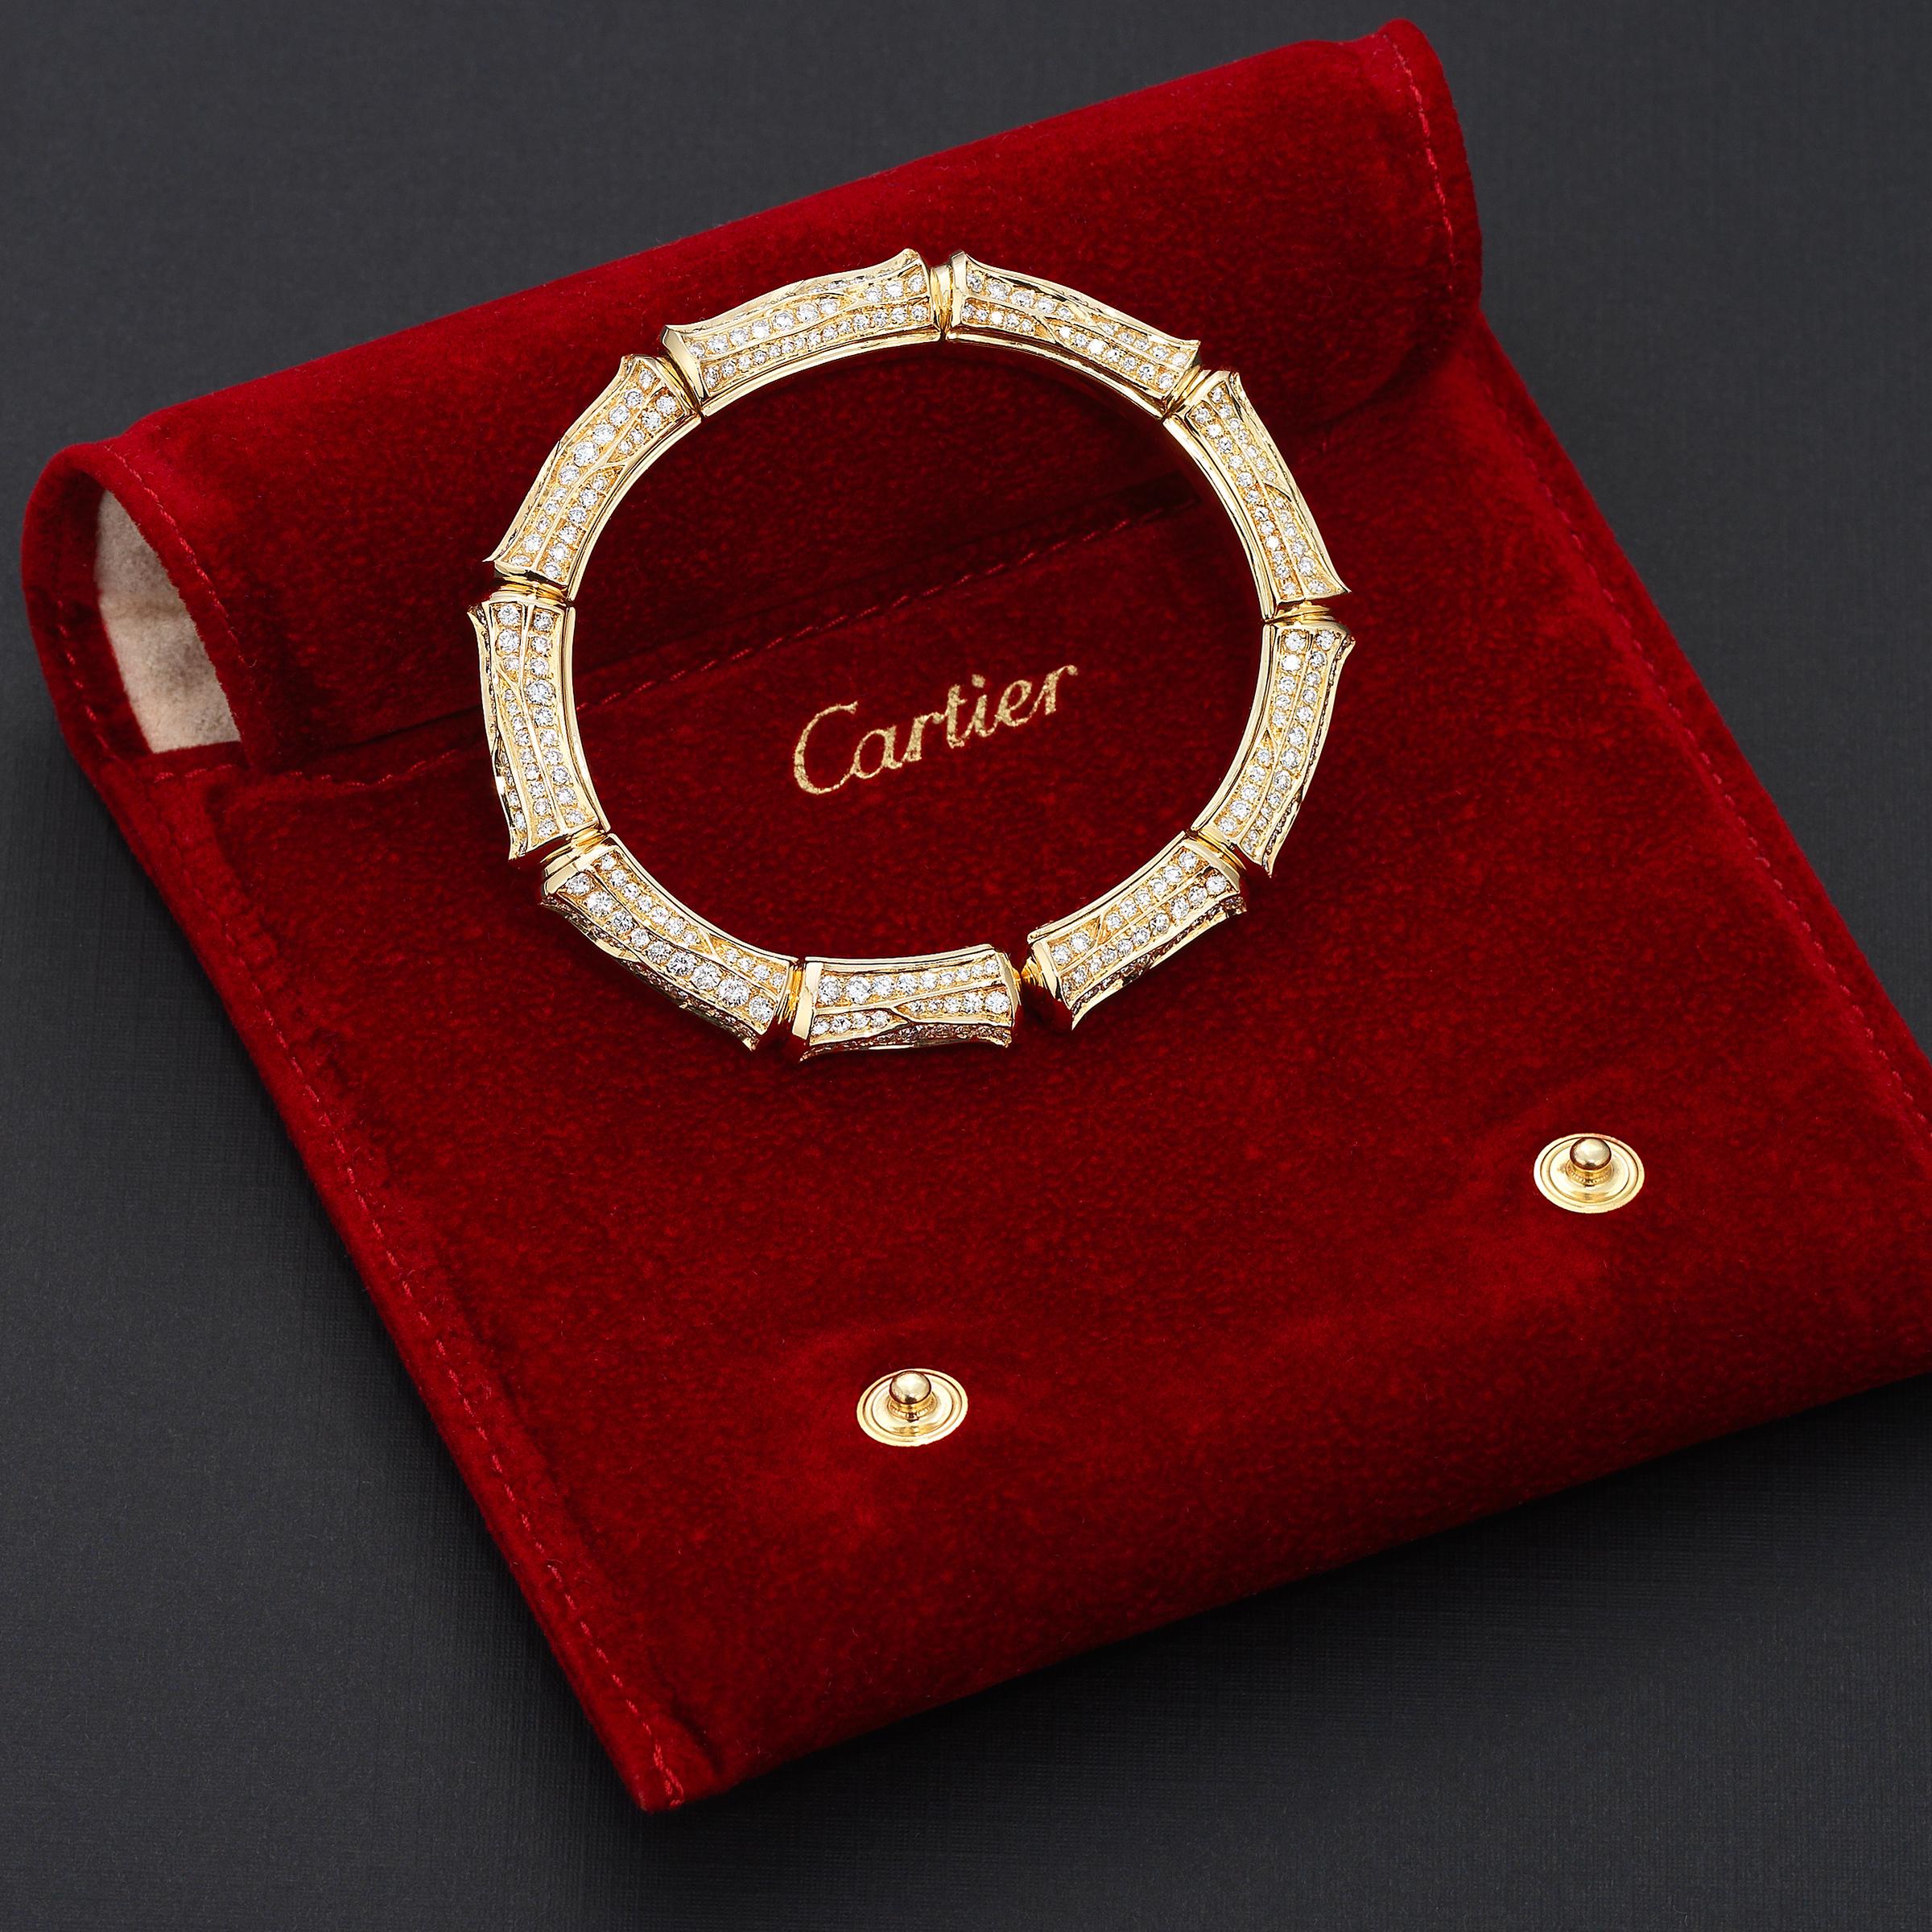 Dazzling vintage Cartier Bamboo cuff bracelet showcasing approximately 10 carats of fine-white brilliant round diamonds impeccably set in lustrous 18 karat yellow gold. The cuff bracelet is wonderfully flexible and encircles the wrist effortlessly